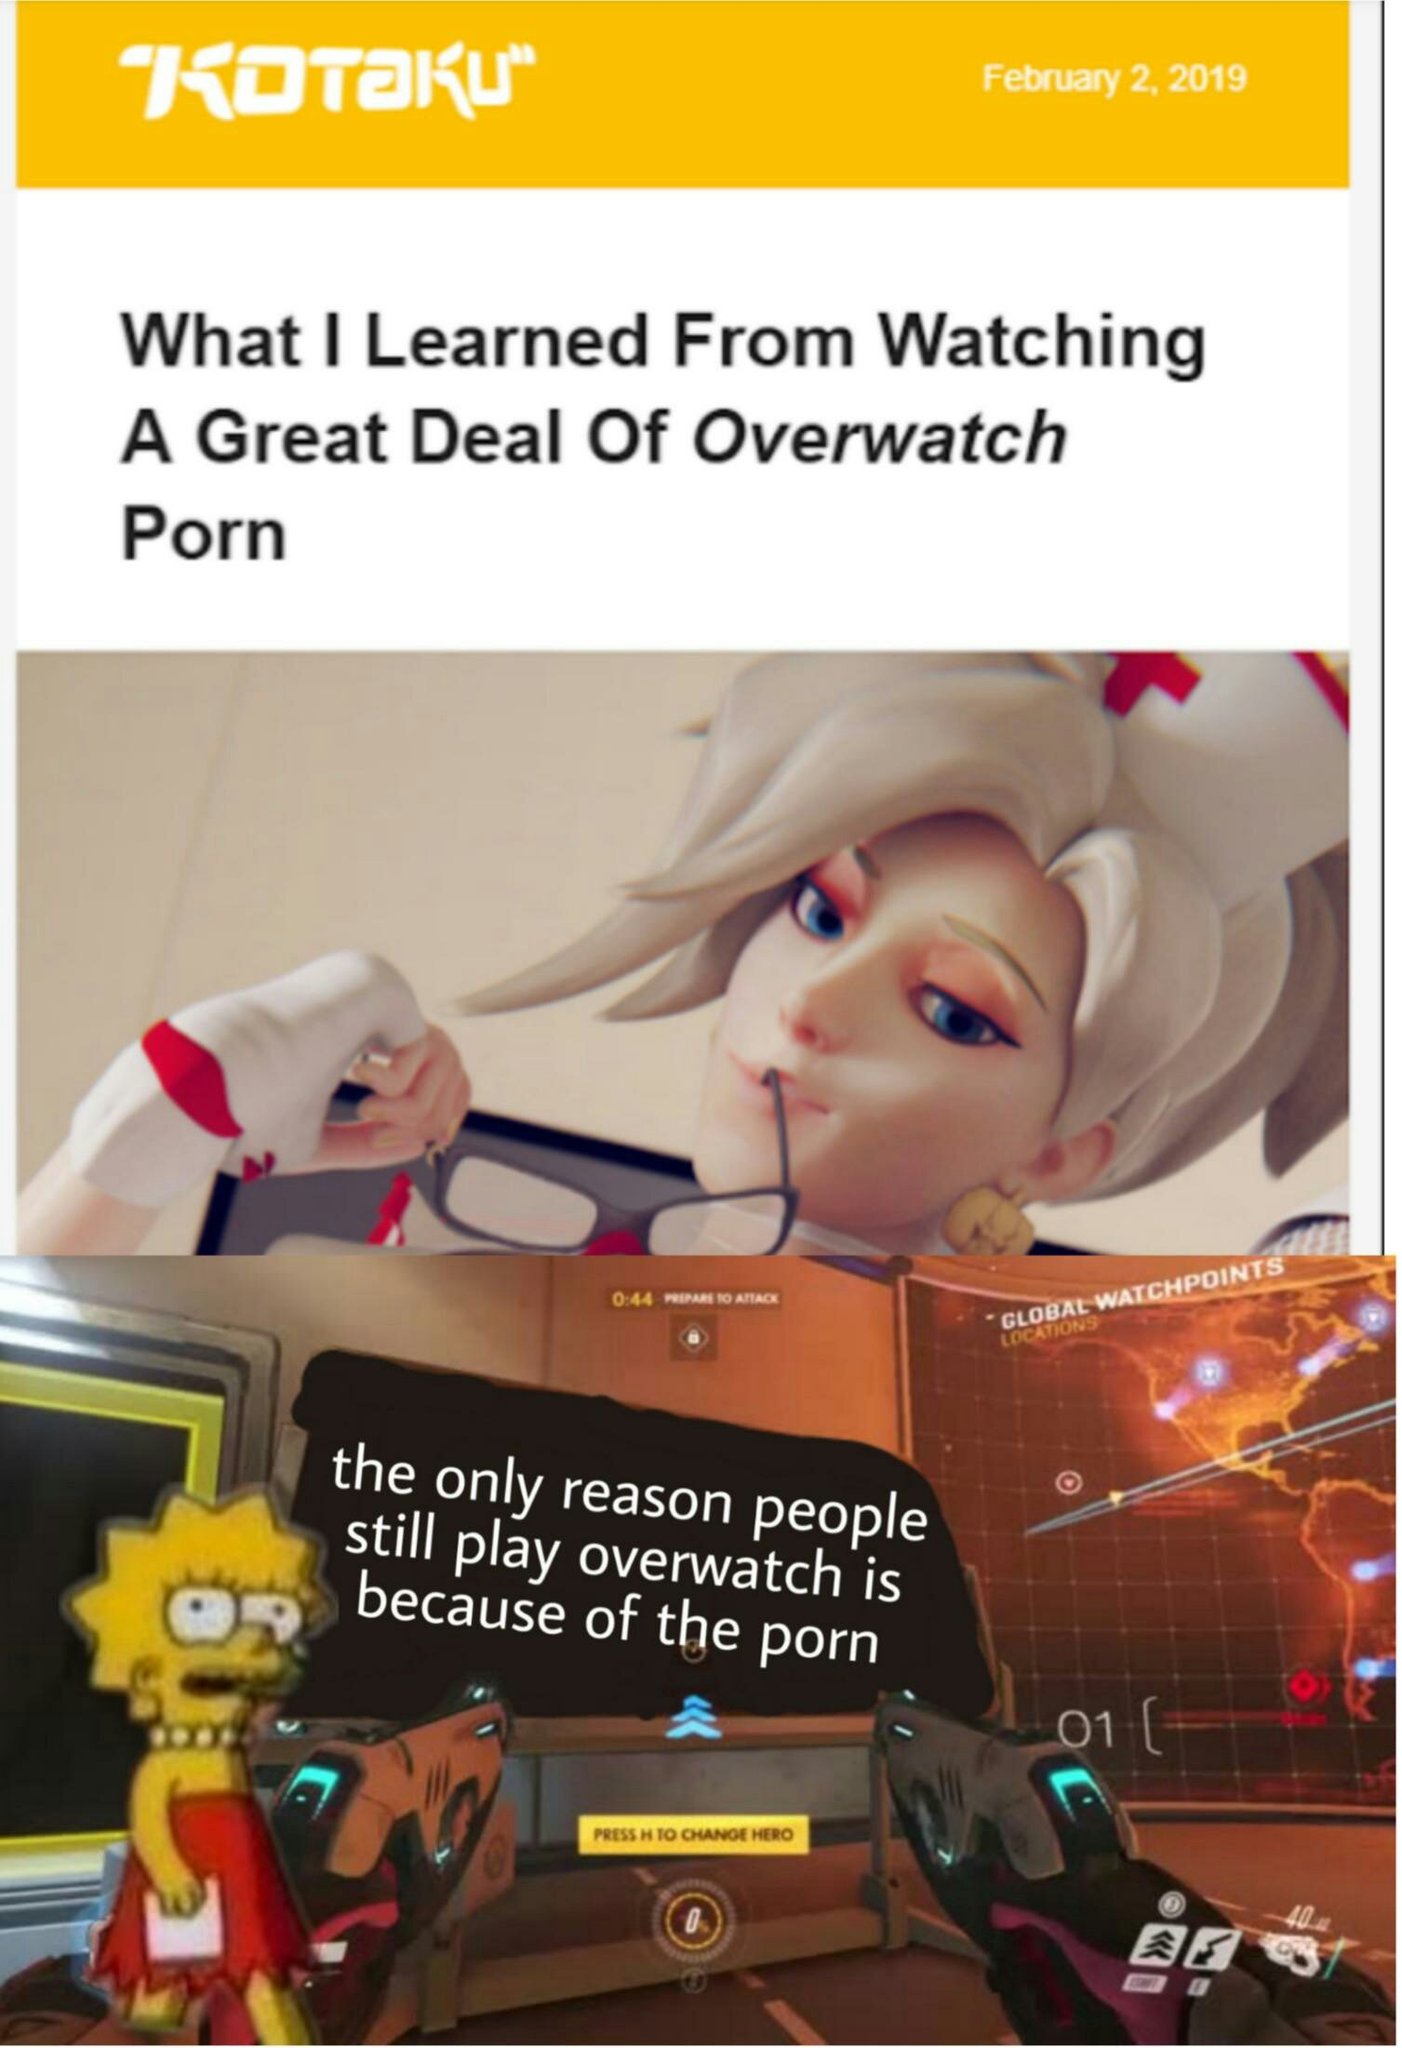 Overwatch porn is very good actually - meme